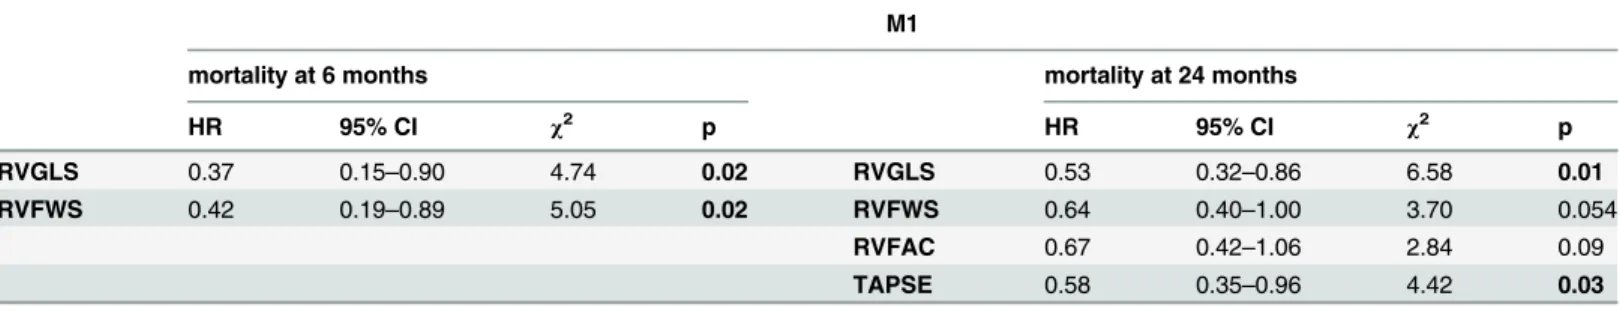 Table 4. Multivariable Cox regression analysis of right ventricular functional parameters predicting mortality at 6 and 24 months